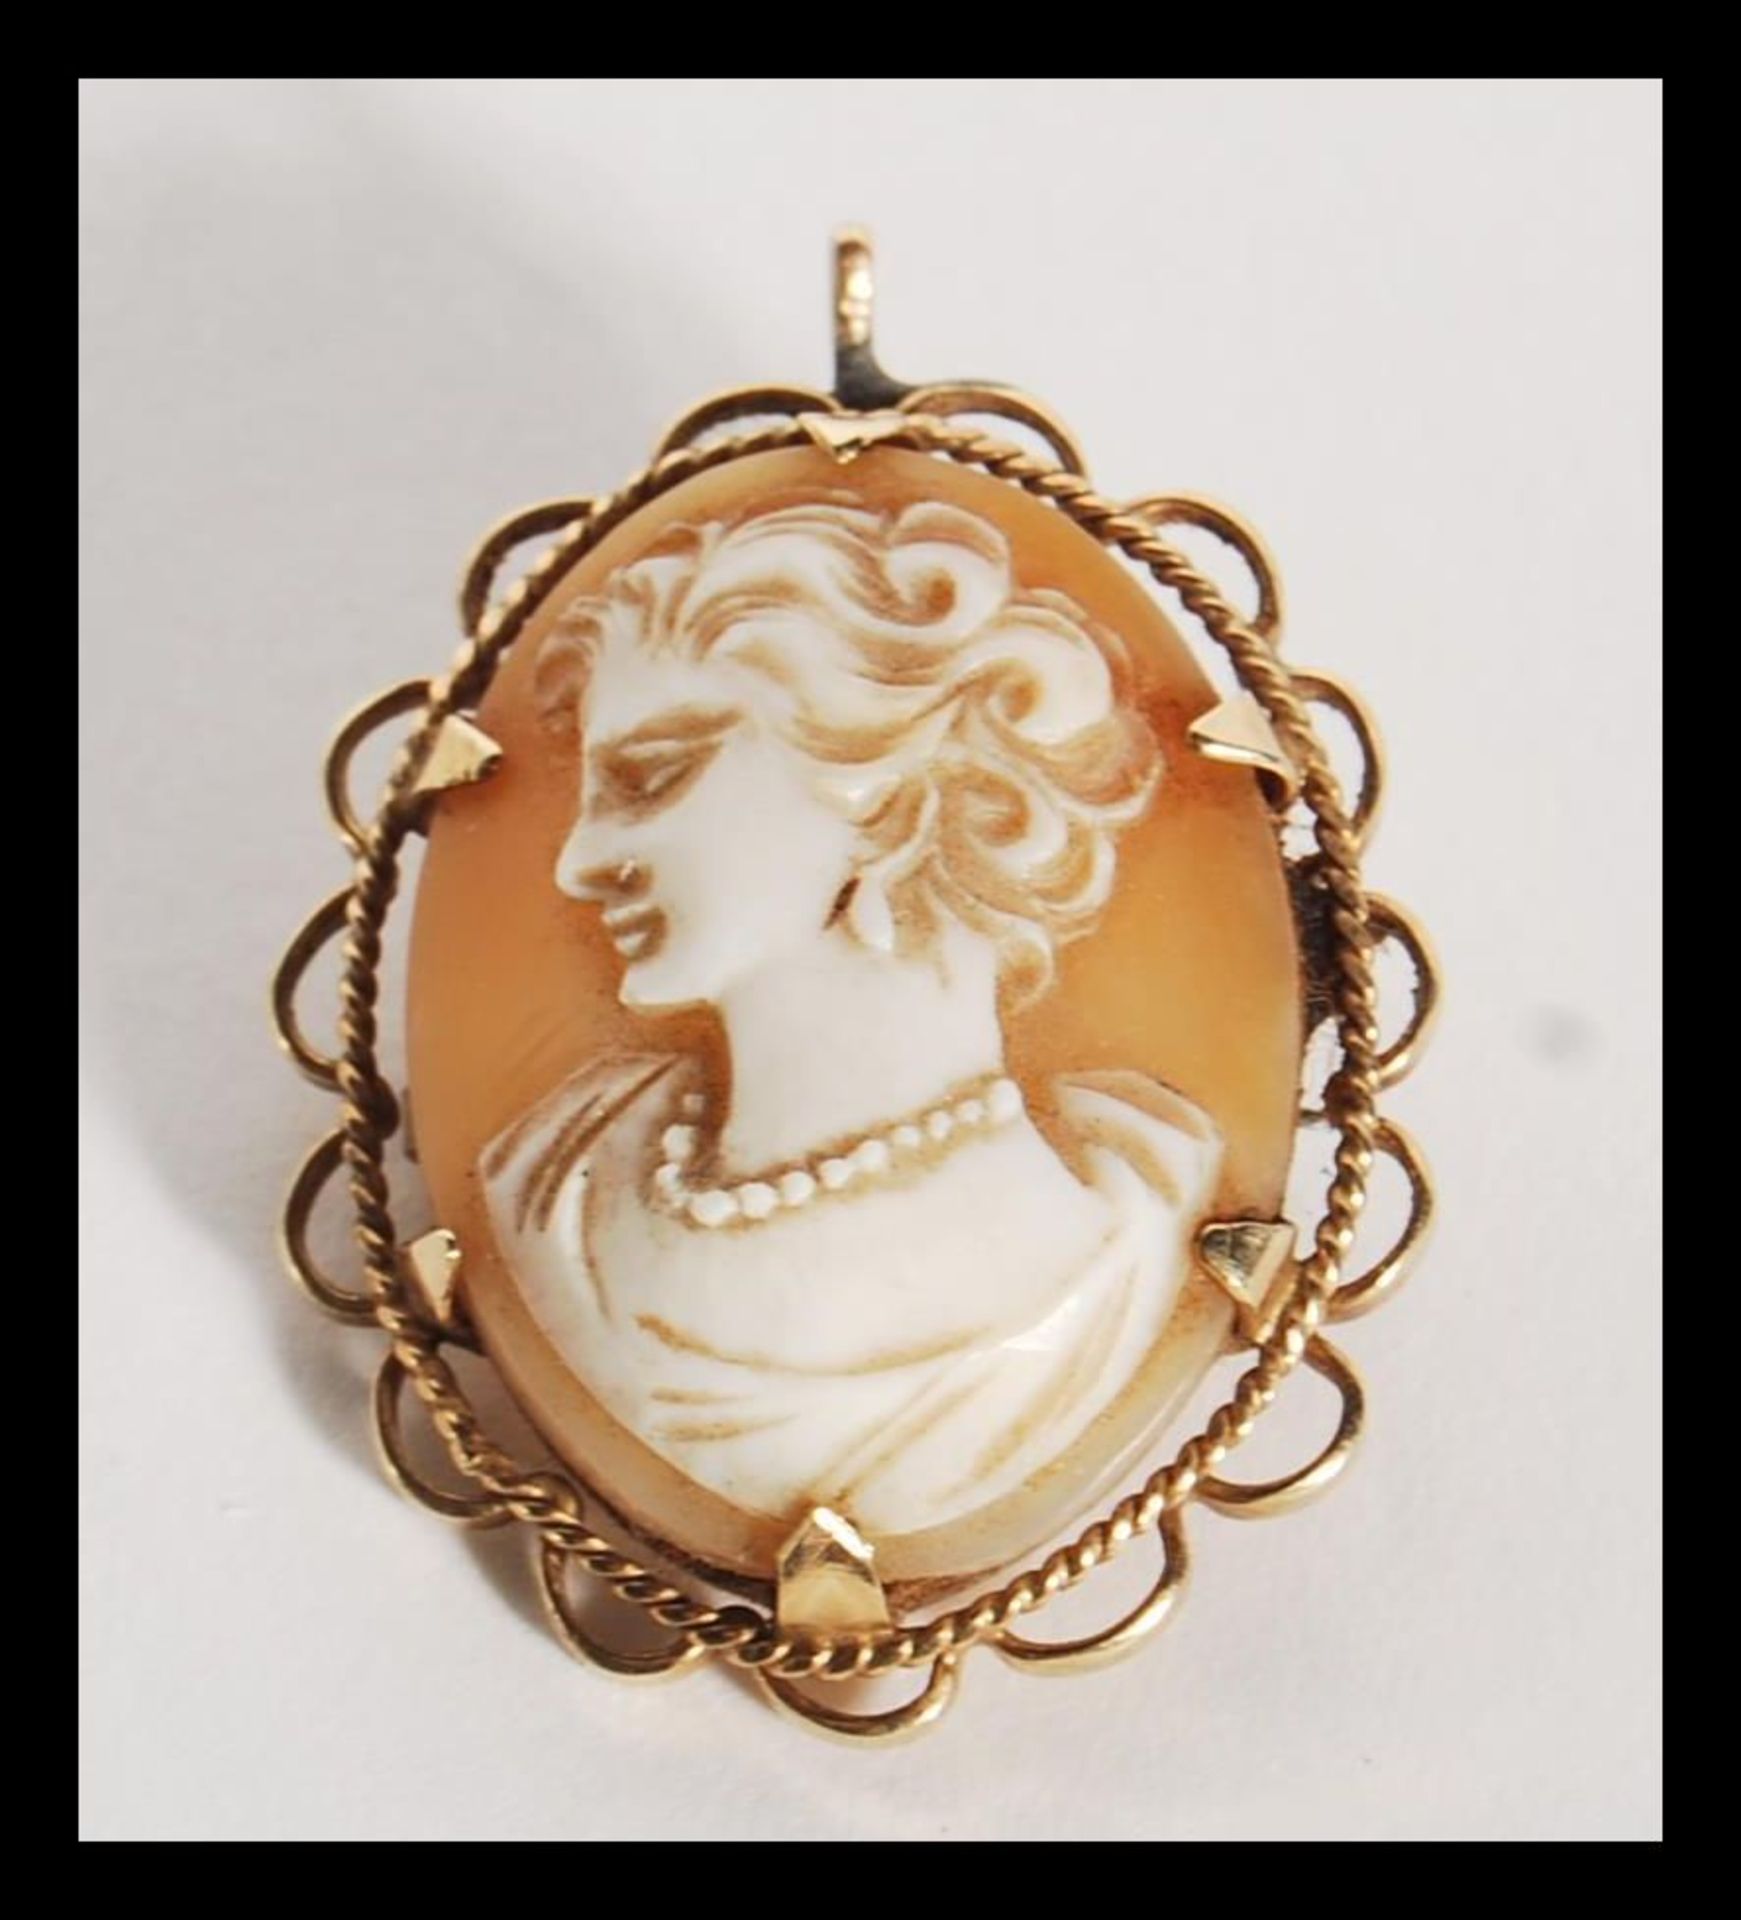 A 9ct gold / 375 marked ladies cameo brooch depicting a maiden facing left, pin verso with